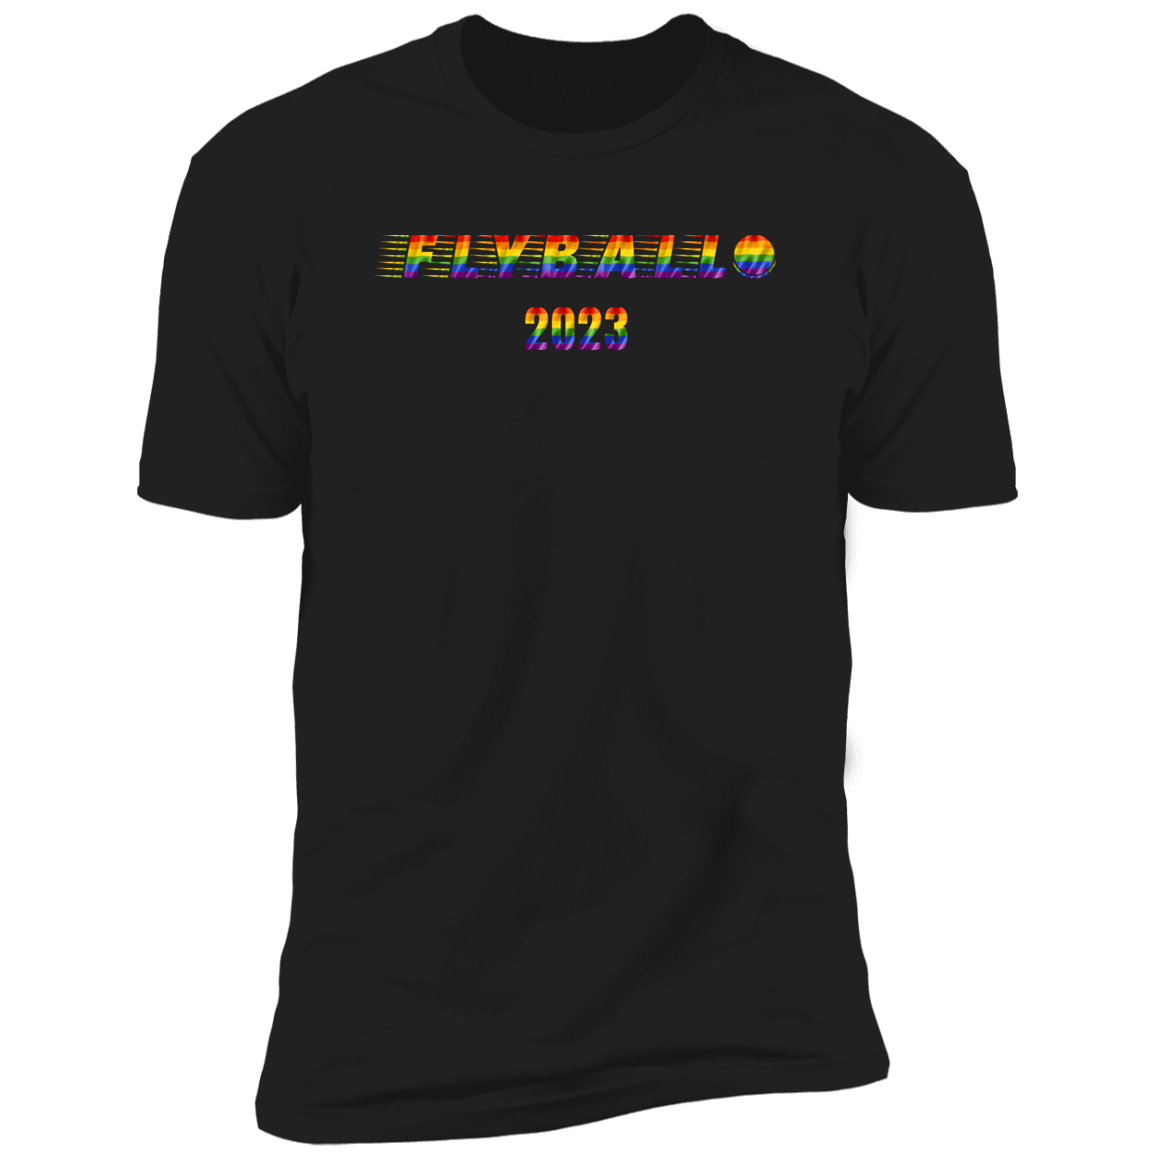 Flyball pride 2023 t-shirt, dog pride dog flyball shirt for humans, in black